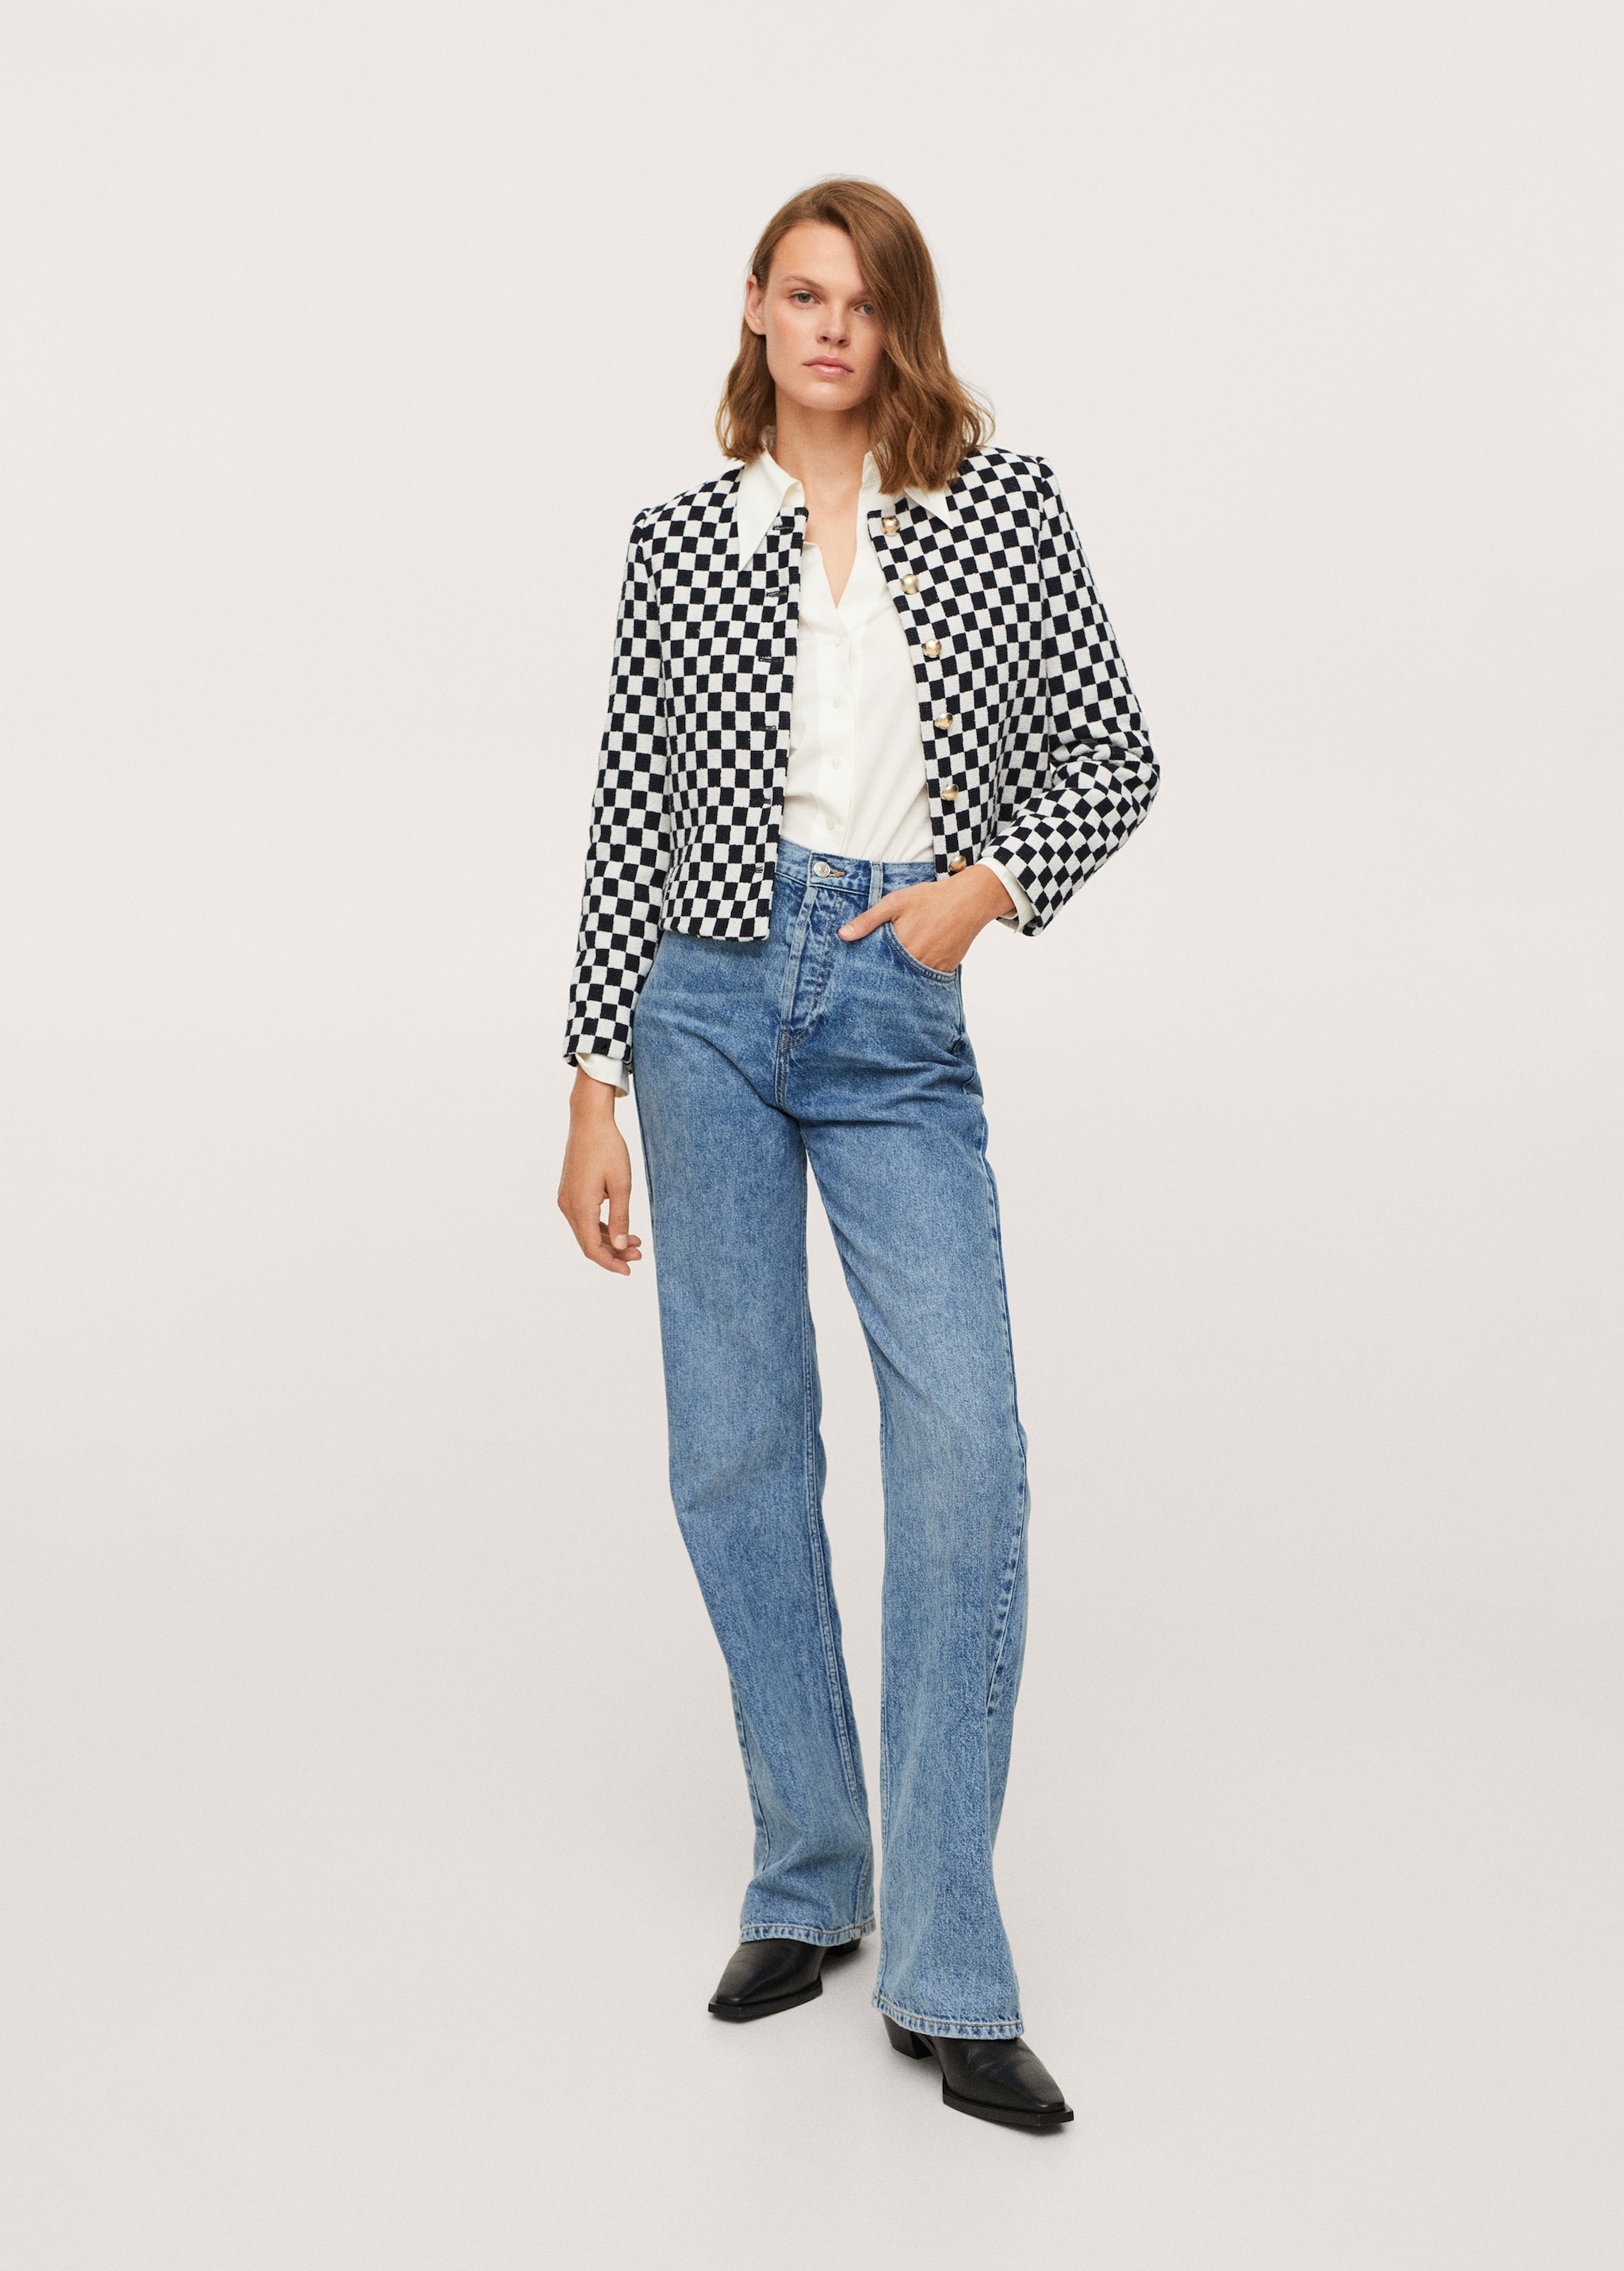 Checked texture jacket - General plane